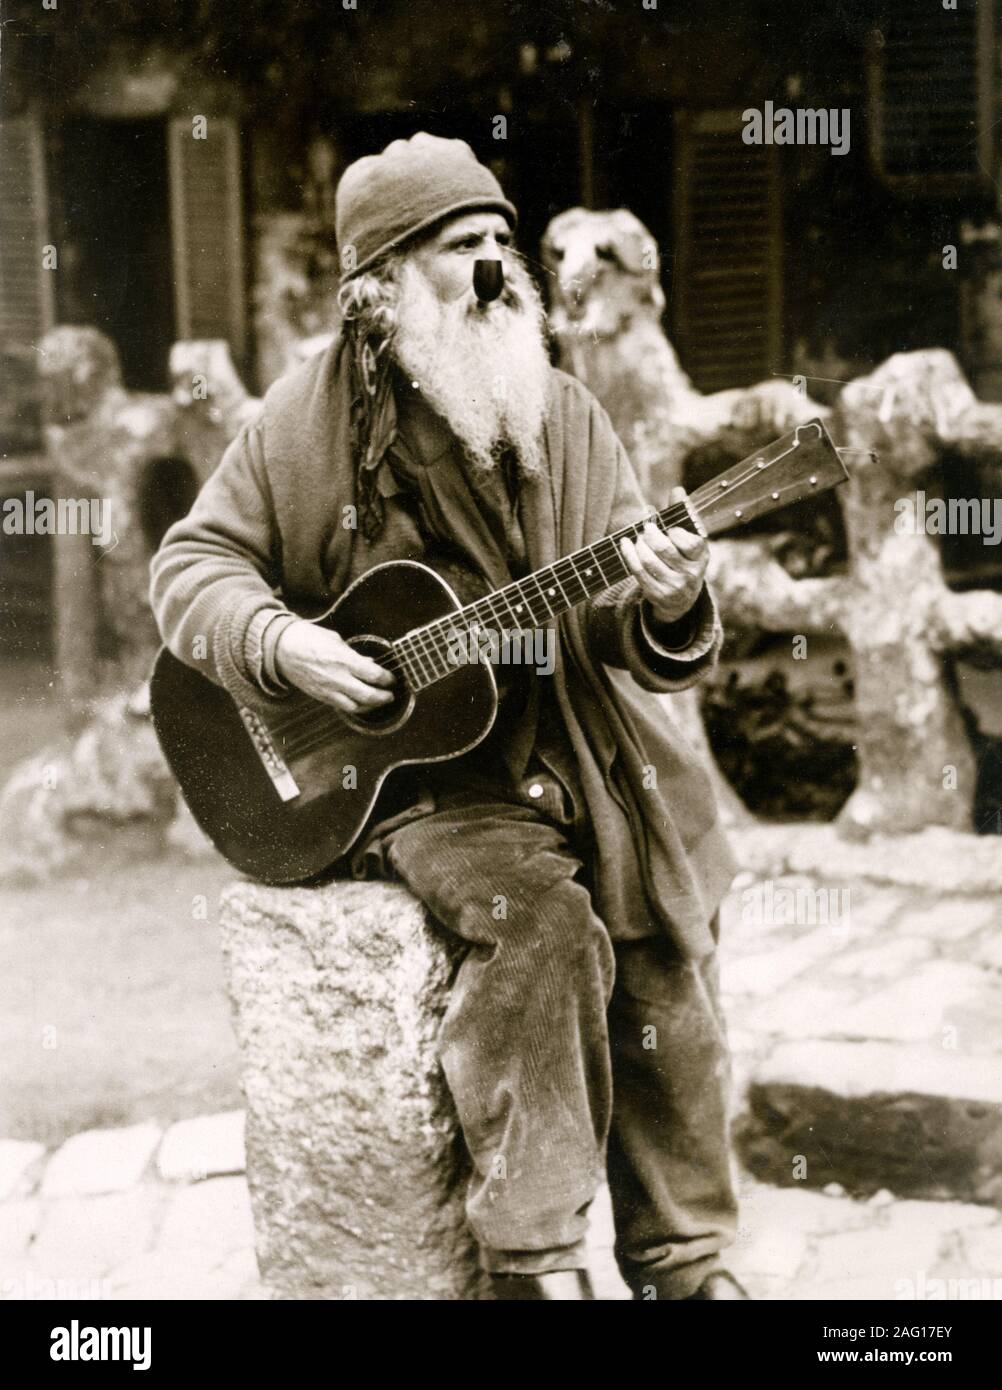 Early 20th century vintage press photograph - old musician with guitar and pipe playing music outside the Lapin Agile club in Montmartre Paris, c.1920s Stock Photo